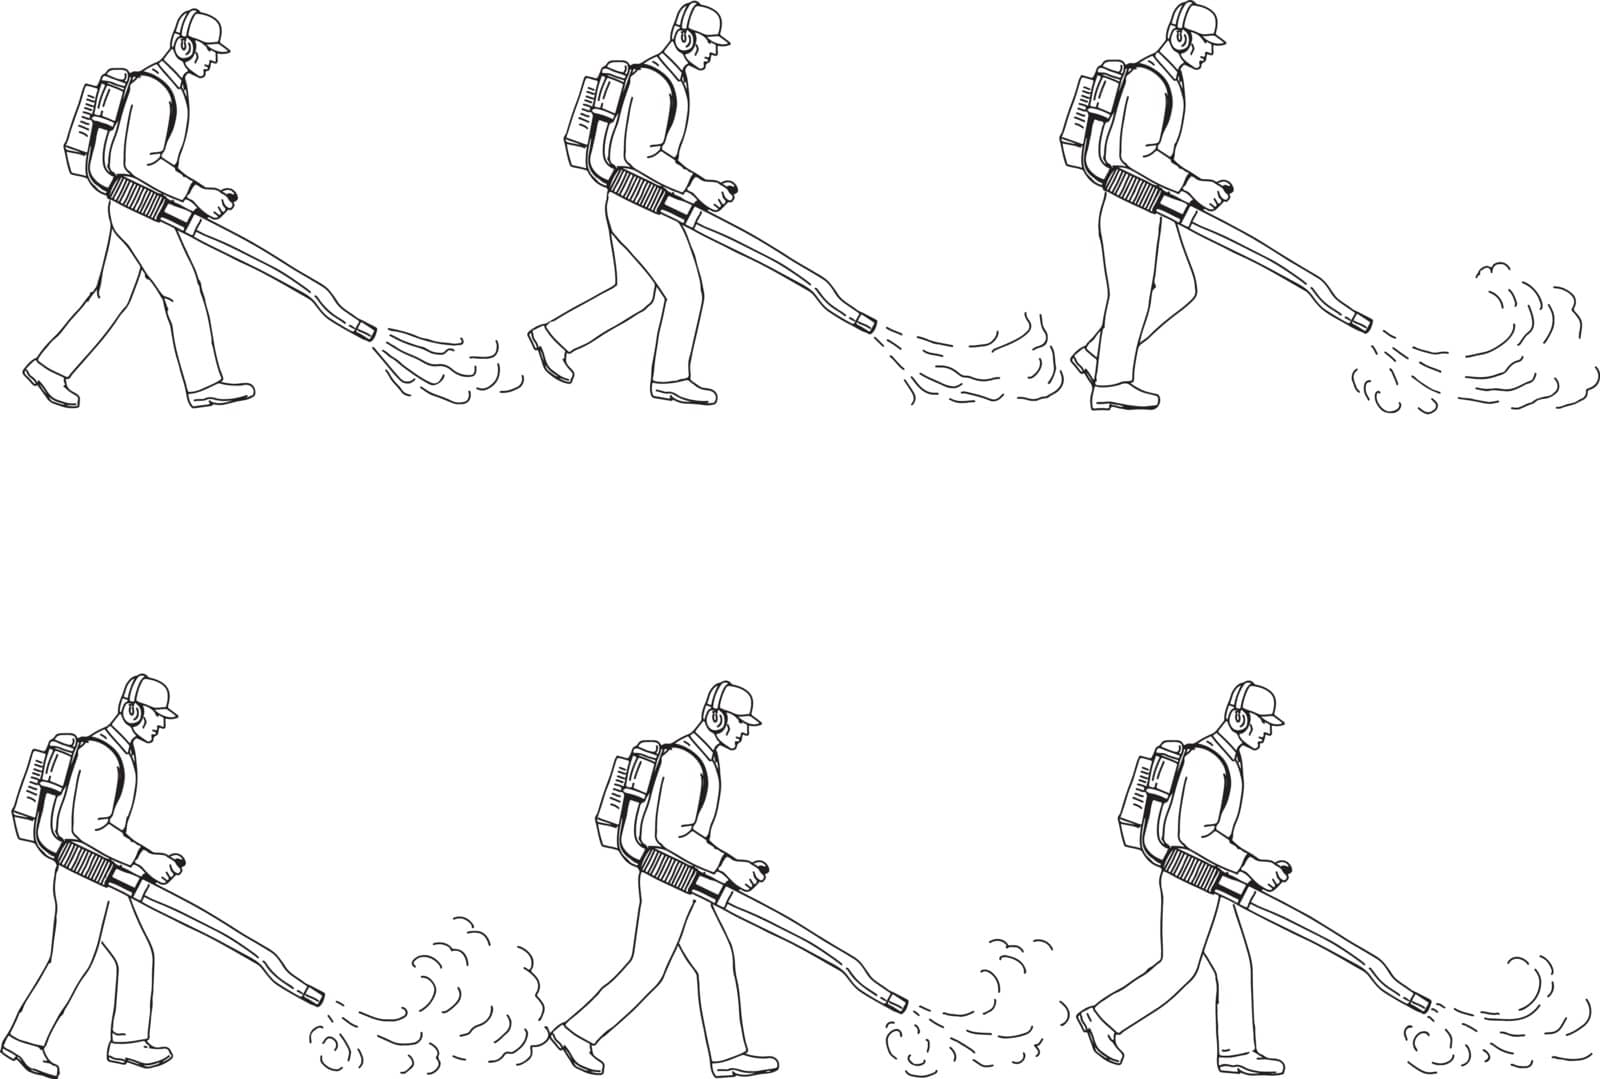 Drawing sketch style illustration of a  a gardener or groundsman with leaf blower or blower vac walking cycle sequence viewed from  side on isolated background.